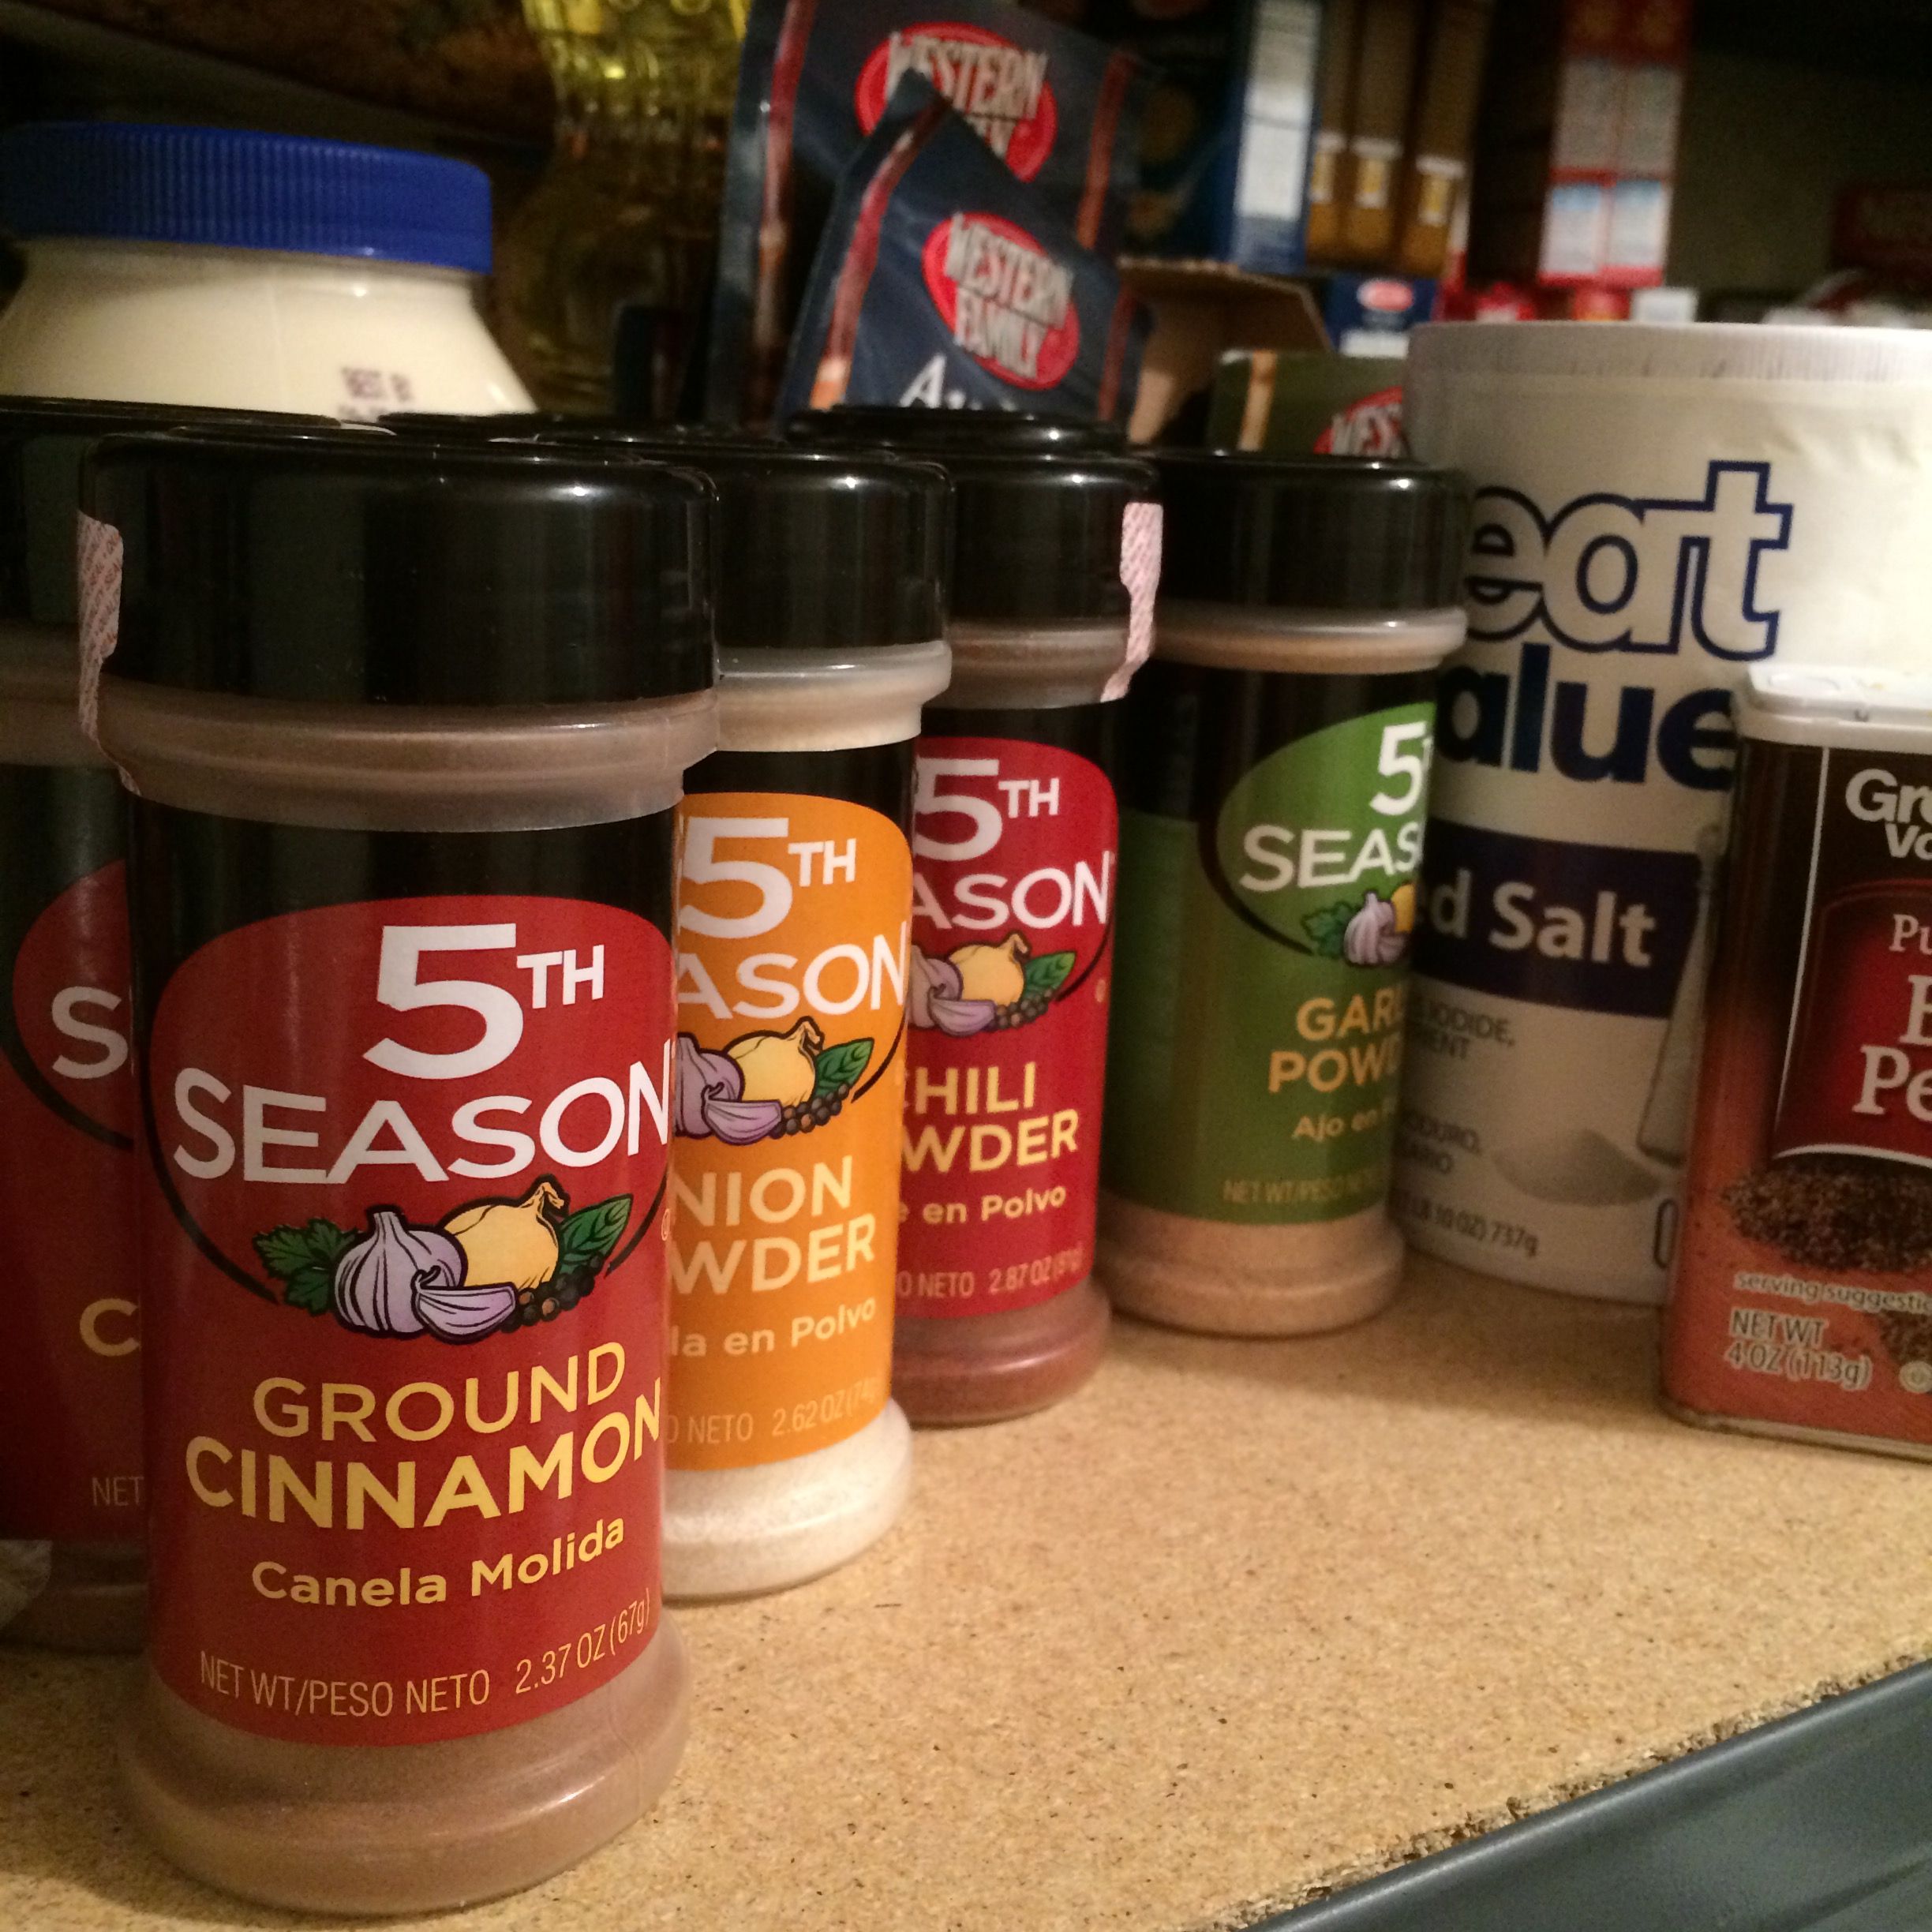 For your #foodstorage, consider adding spices. Buy them ...